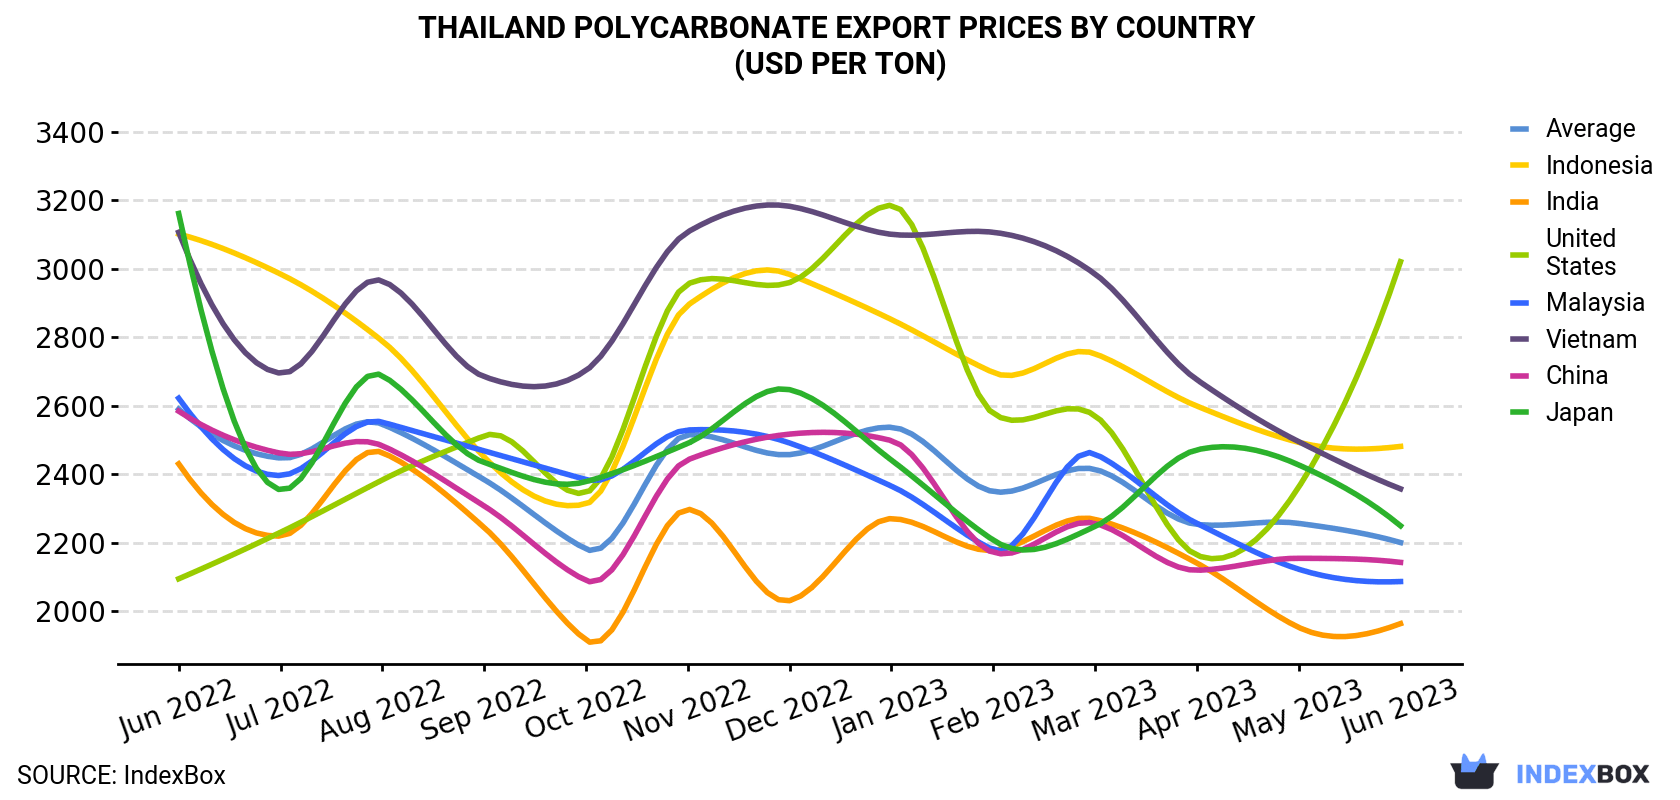 Thailand Polycarbonate Export Prices By Country (USD Per Ton)